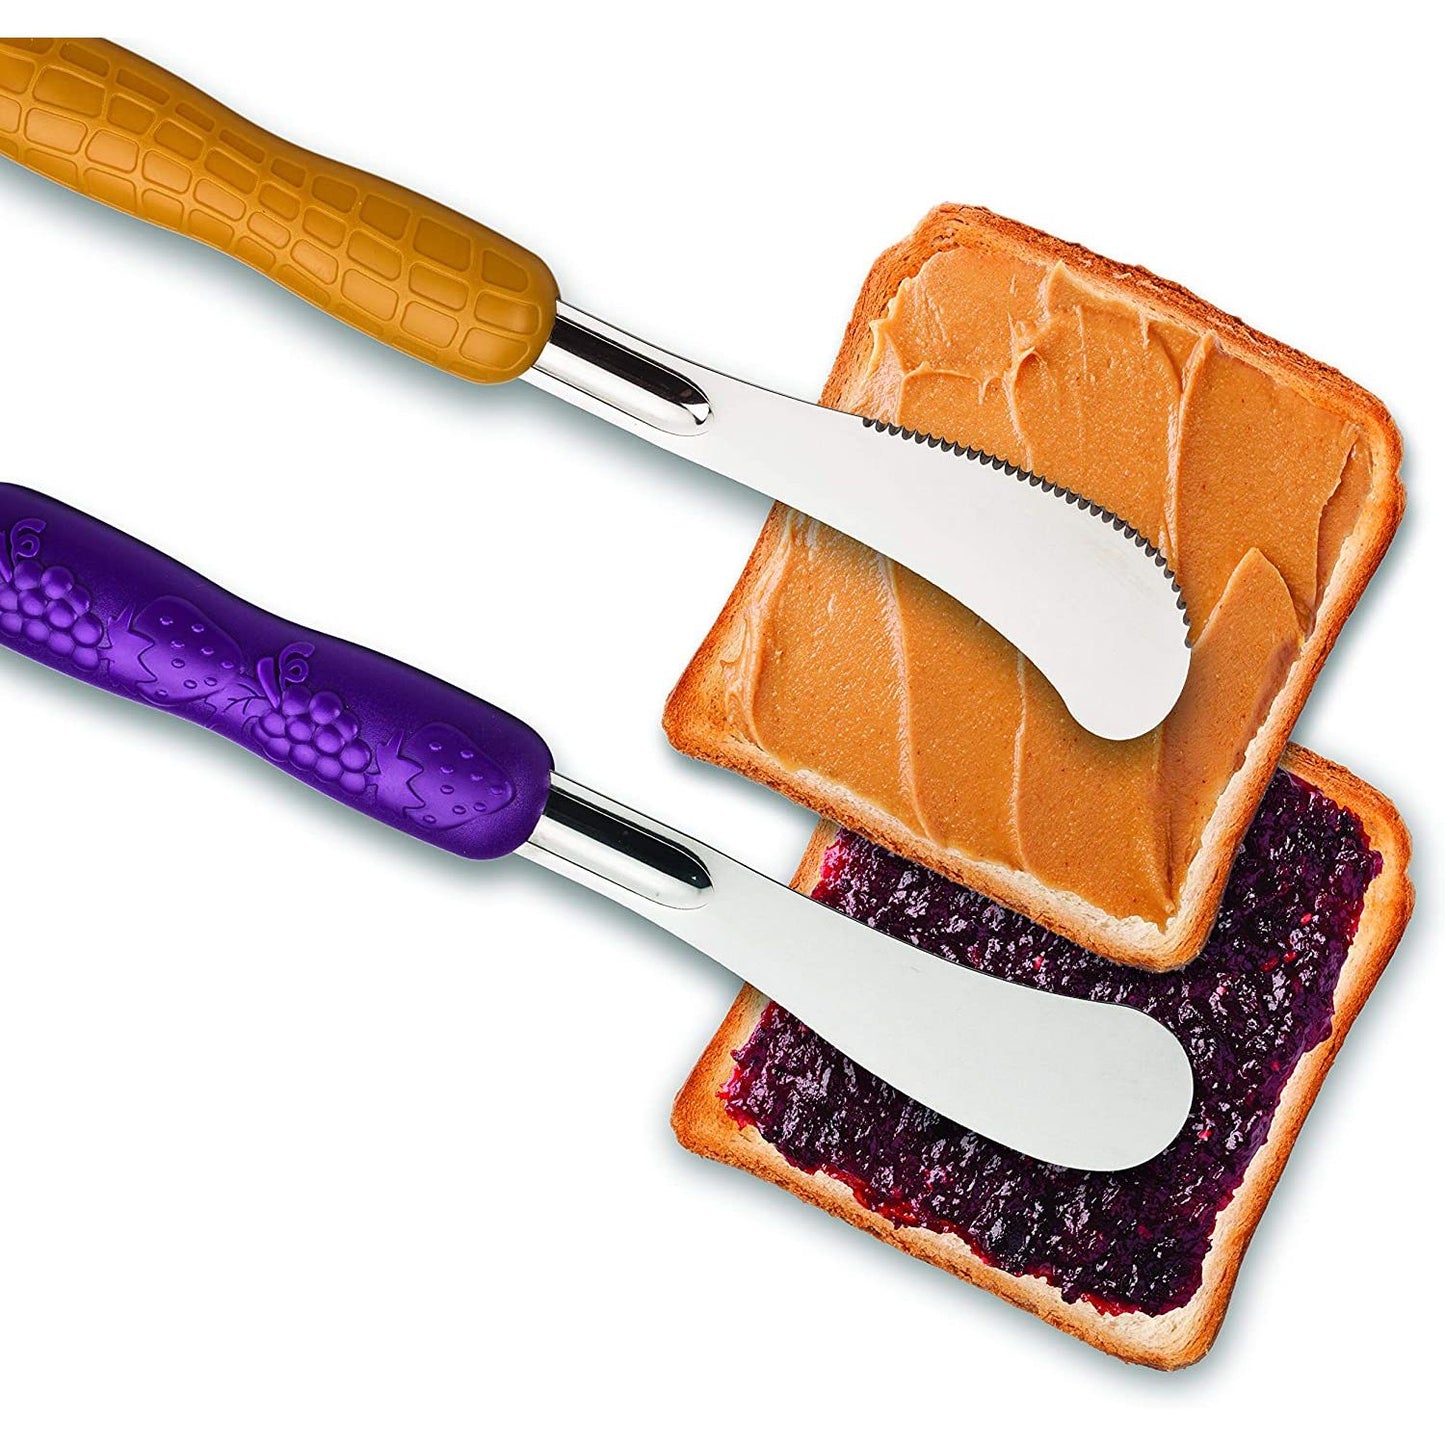 Mobi Pb&J Peanut Butter & Jelly 2-In-1 Spreader Knives With Serrated Edge